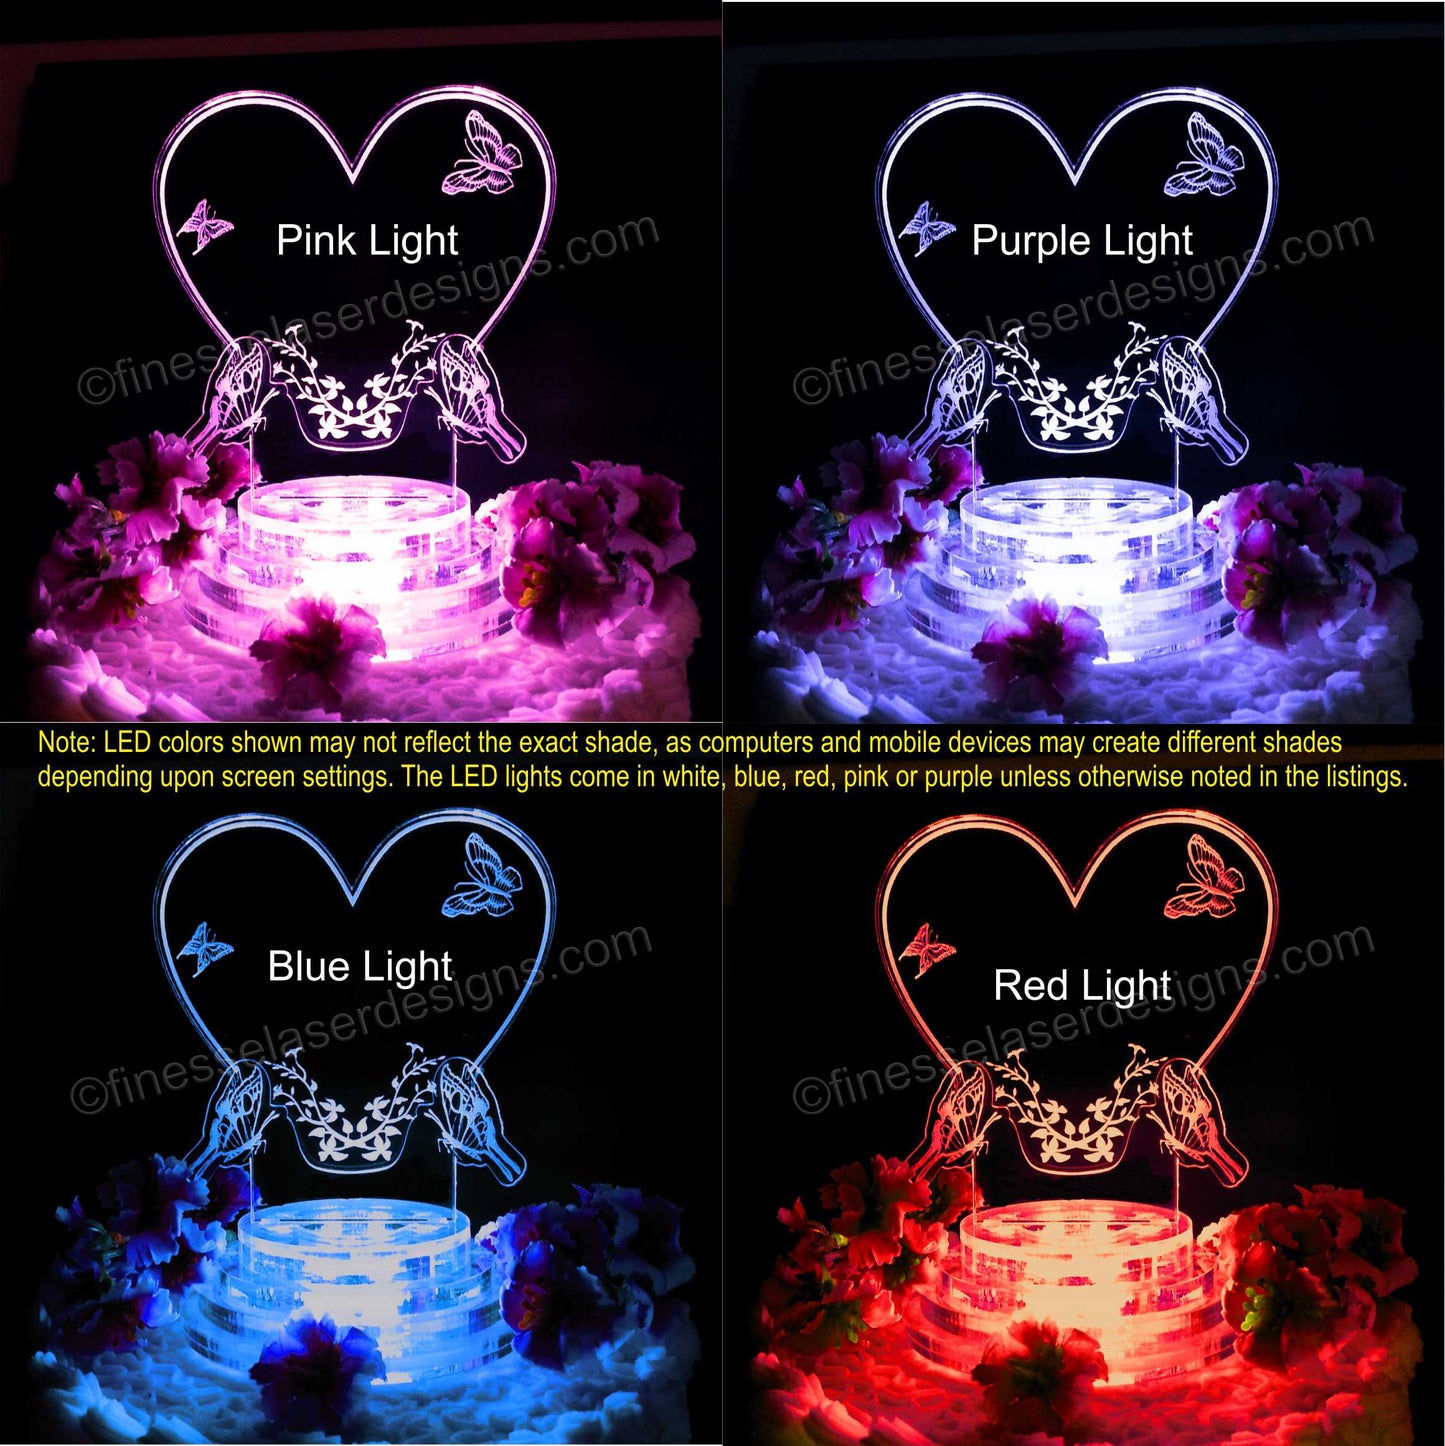 Colored views of acrylic heart shaped cake topper with butterflies engraved showing pink, purple, blue and red lighted views